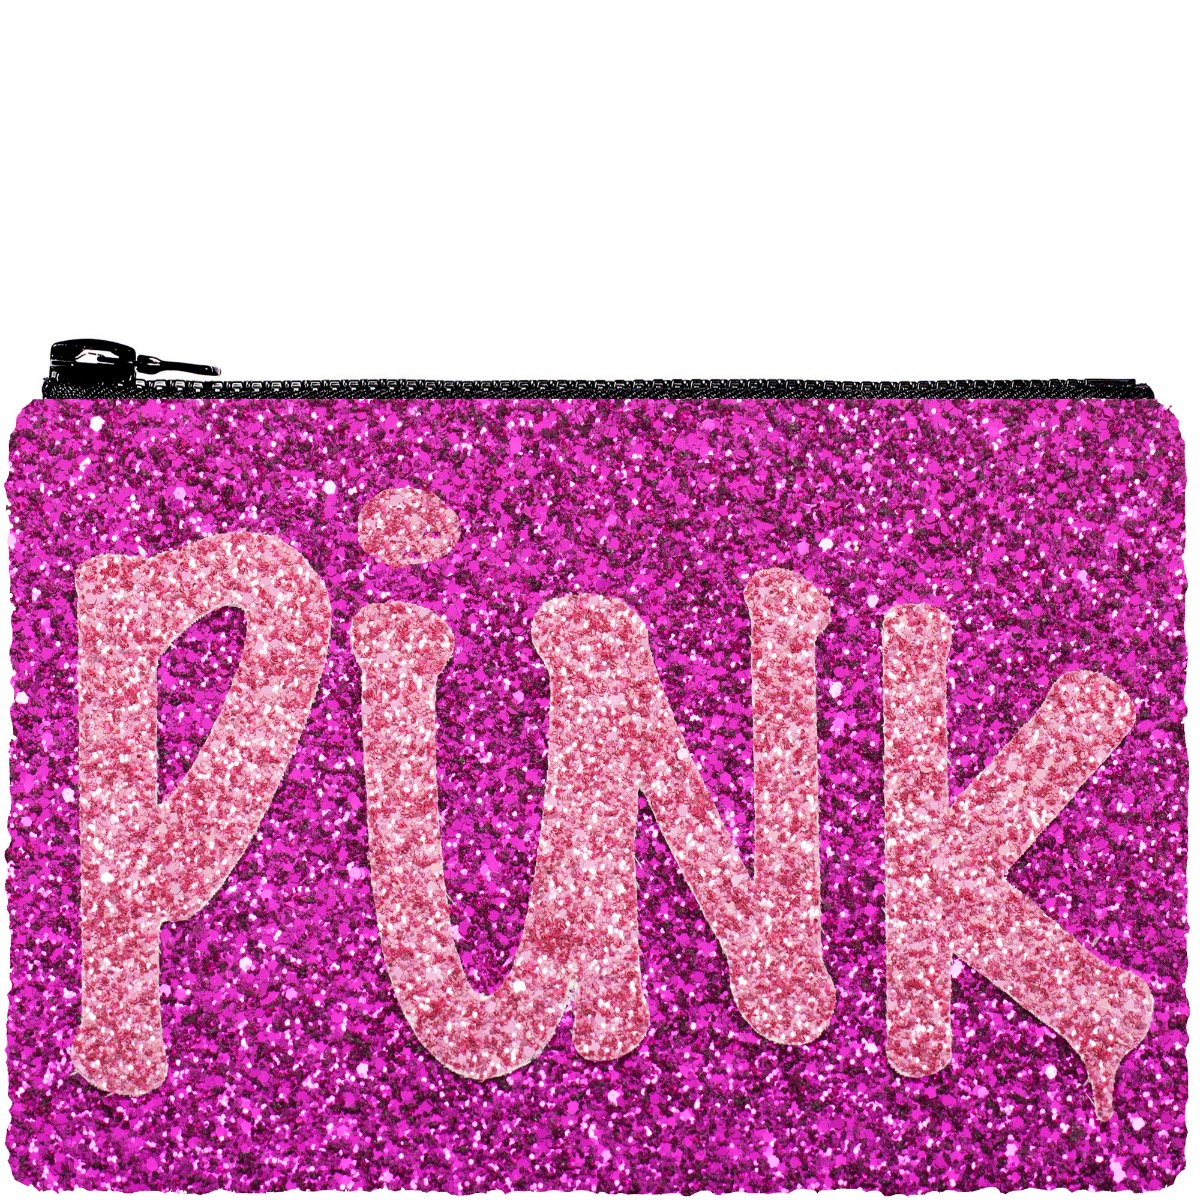 I Know The Queen 'Pink Punk' Glitter Clutch Bag